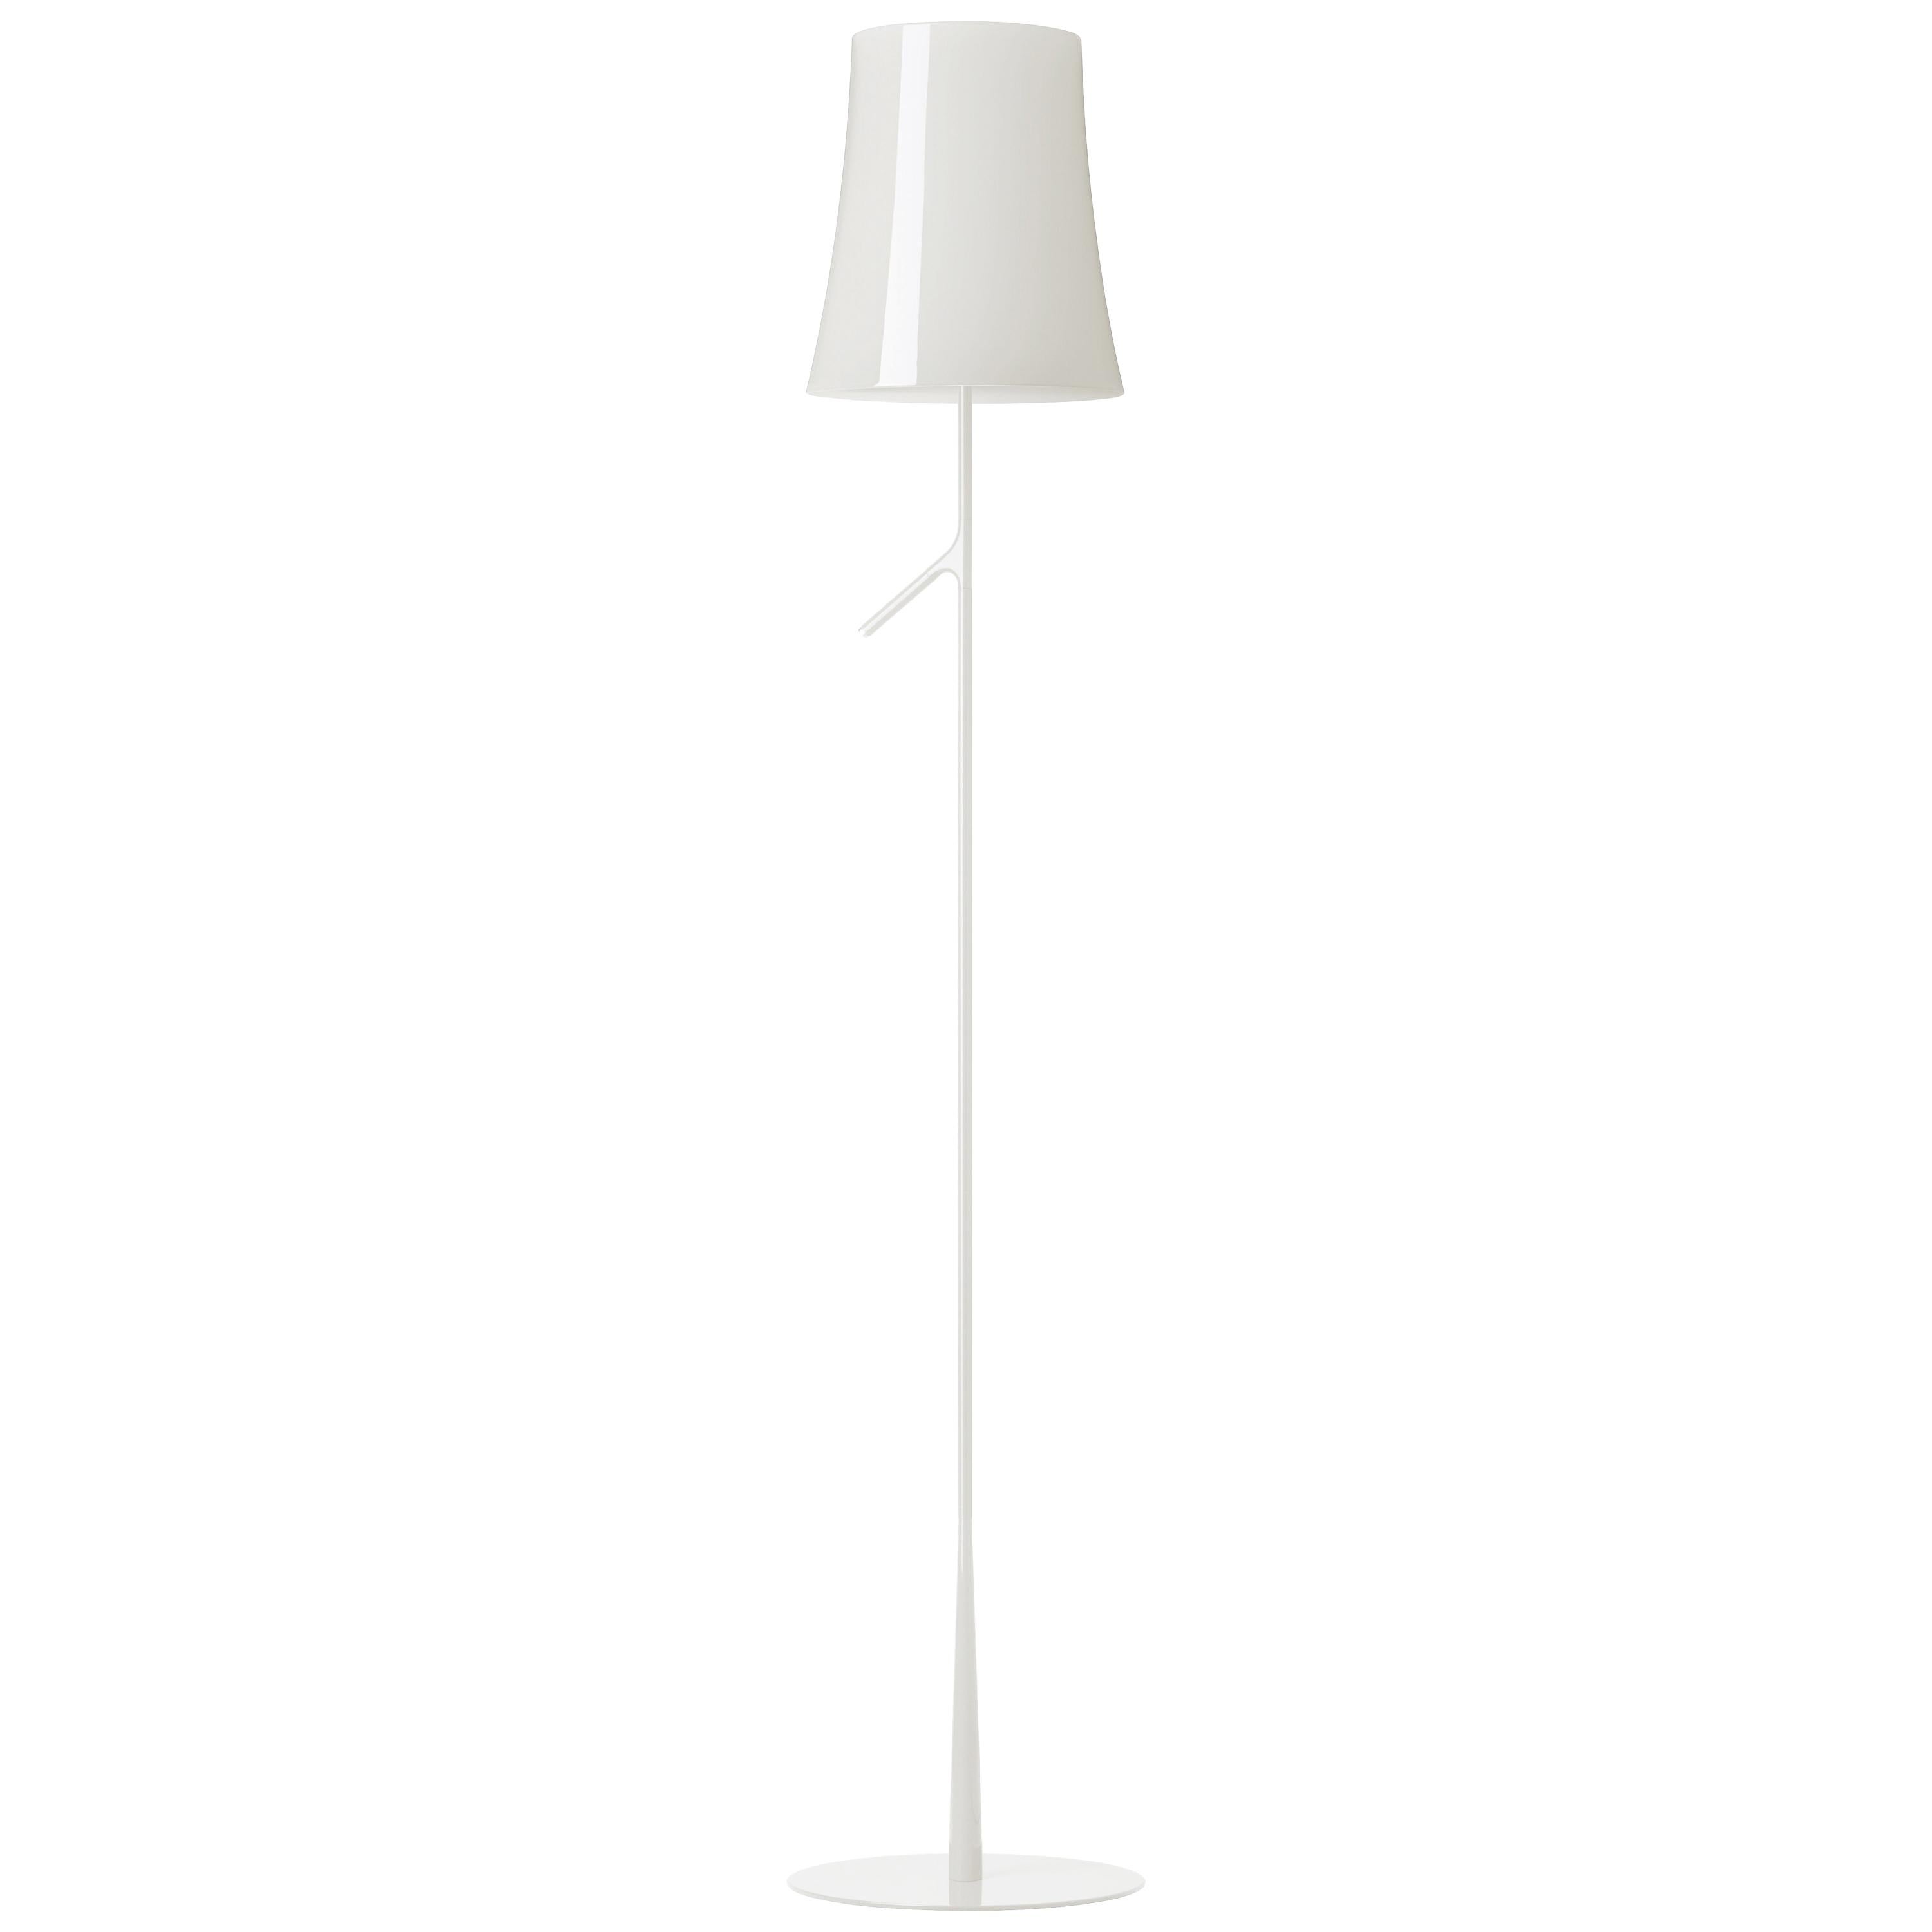 Foscarini Dimmable Birdie Floor Lamp in White by Ludovica & Roberto Palomba